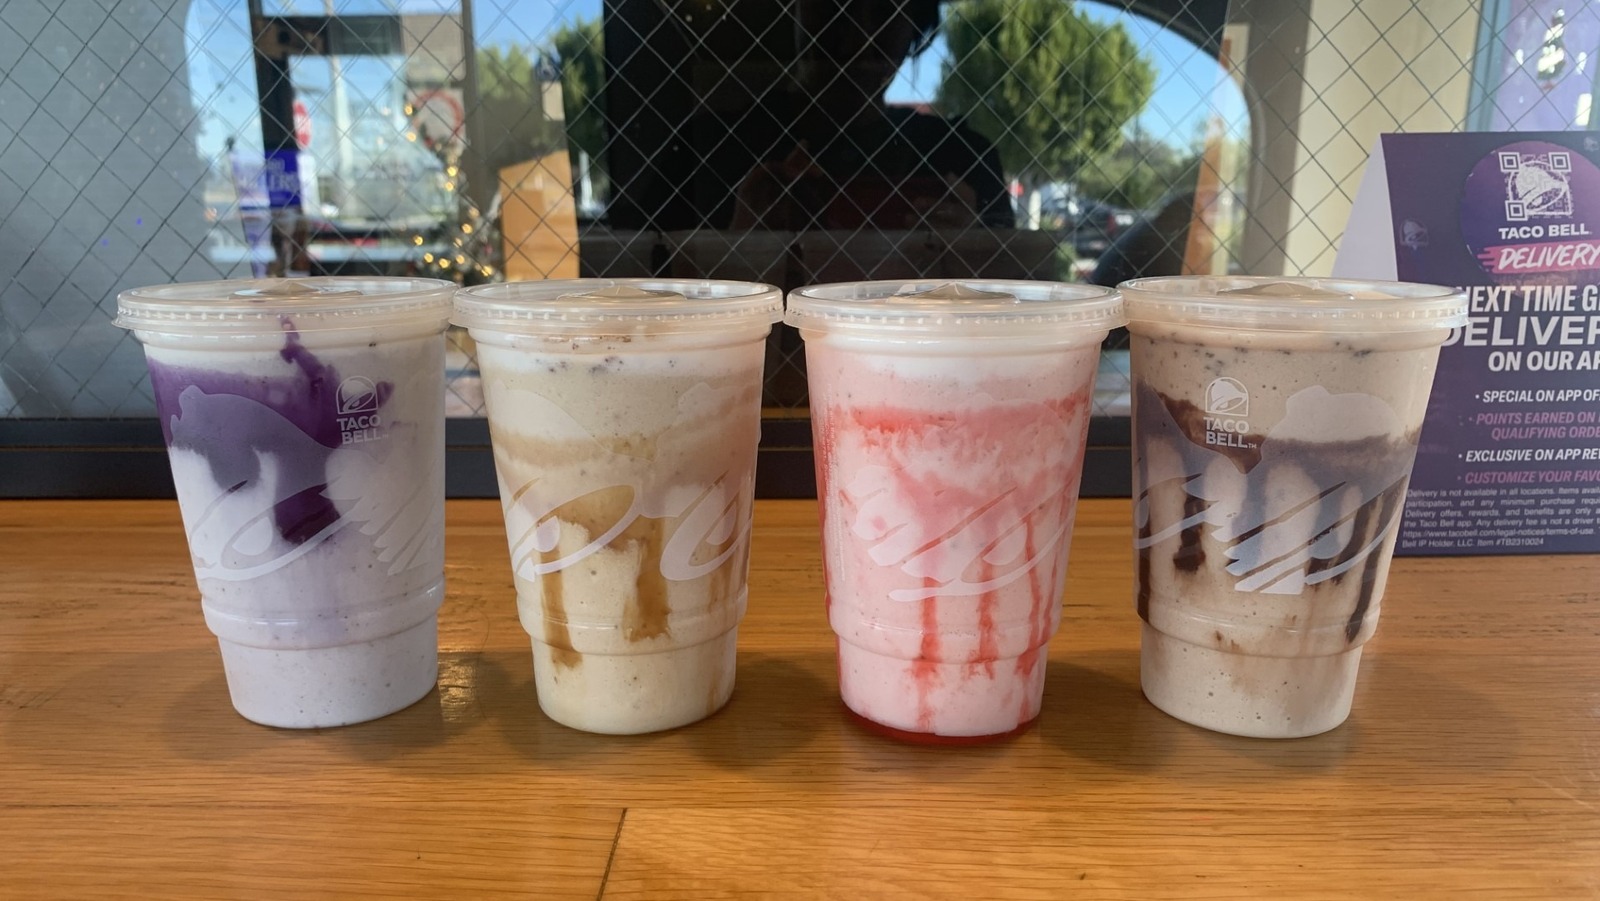 https://www.mashed.com/img/gallery/taco-bell-churro-chillers-review-these-yummy-and-affordable-shakes-pass-our-taste-test/l-intro-1702774277.jpg